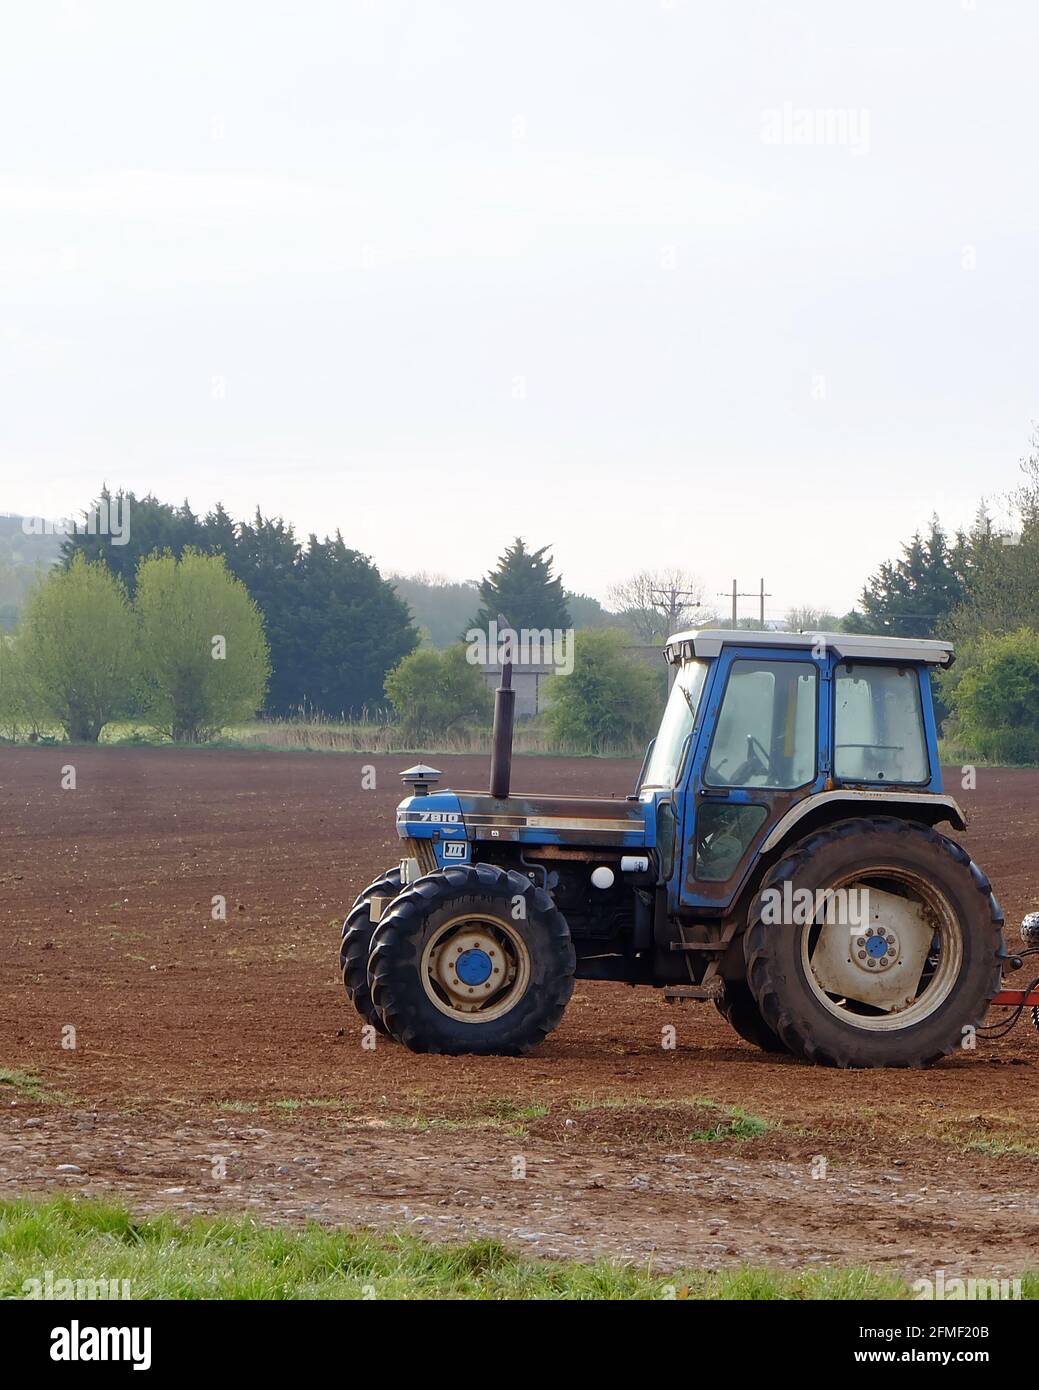 May 2021 - Blue 4x4 New Holland Ford tractor for working the seed bed prior to planting Stock Photo